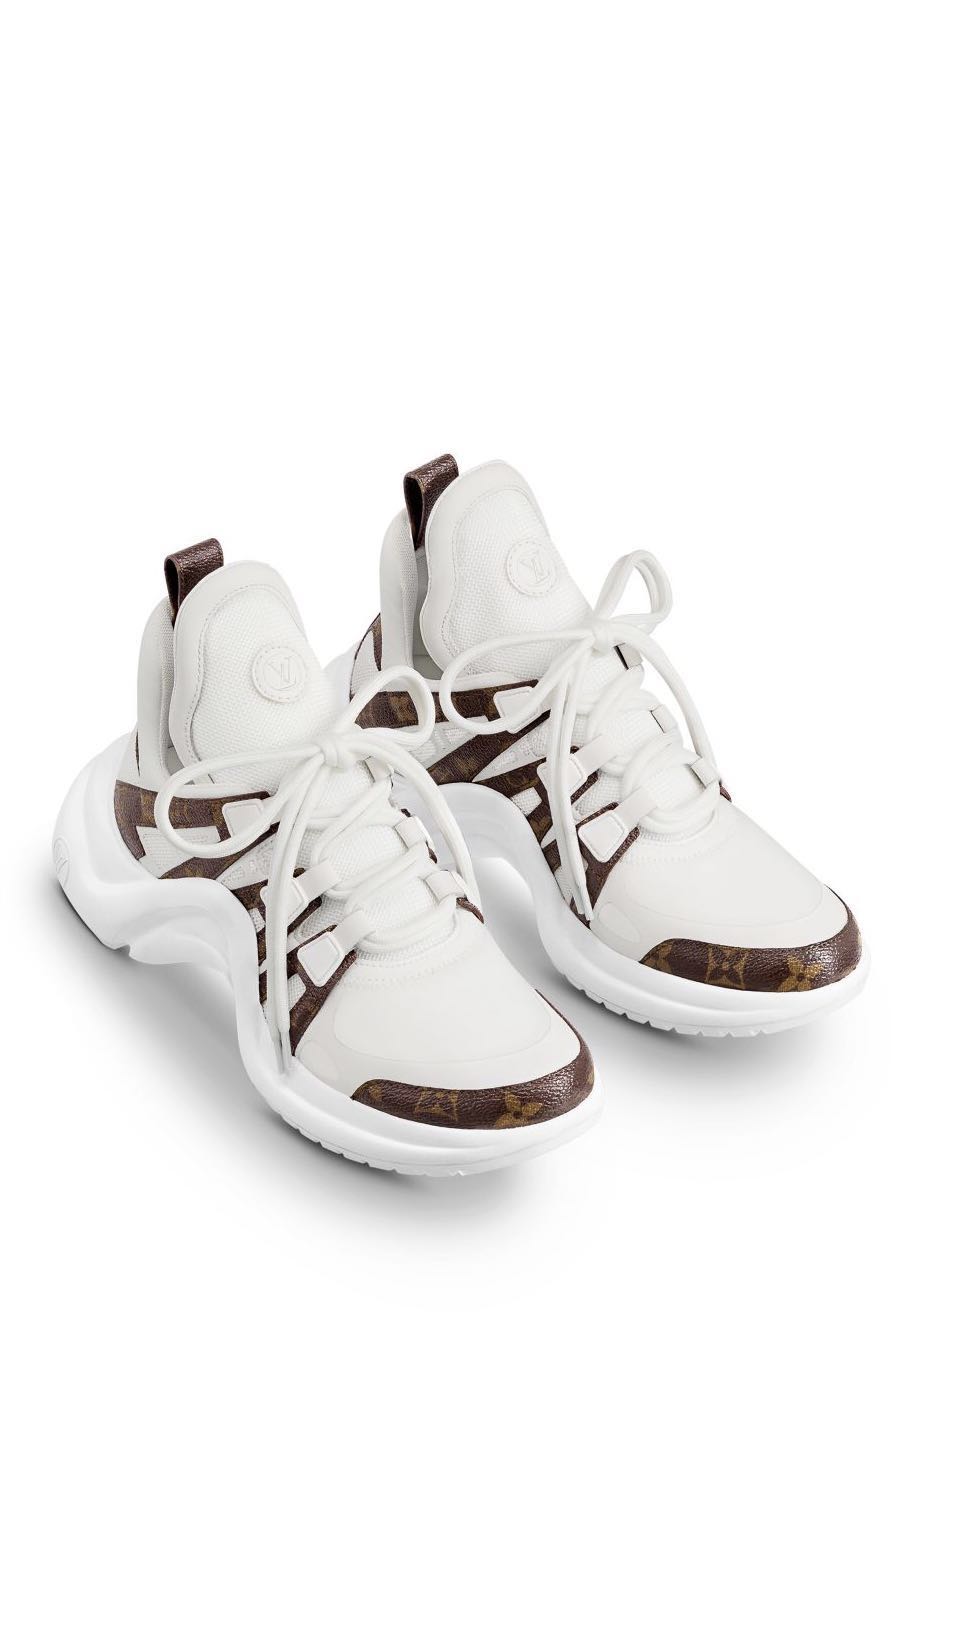 LV Archlight Trainers - Shoes 1A43L1